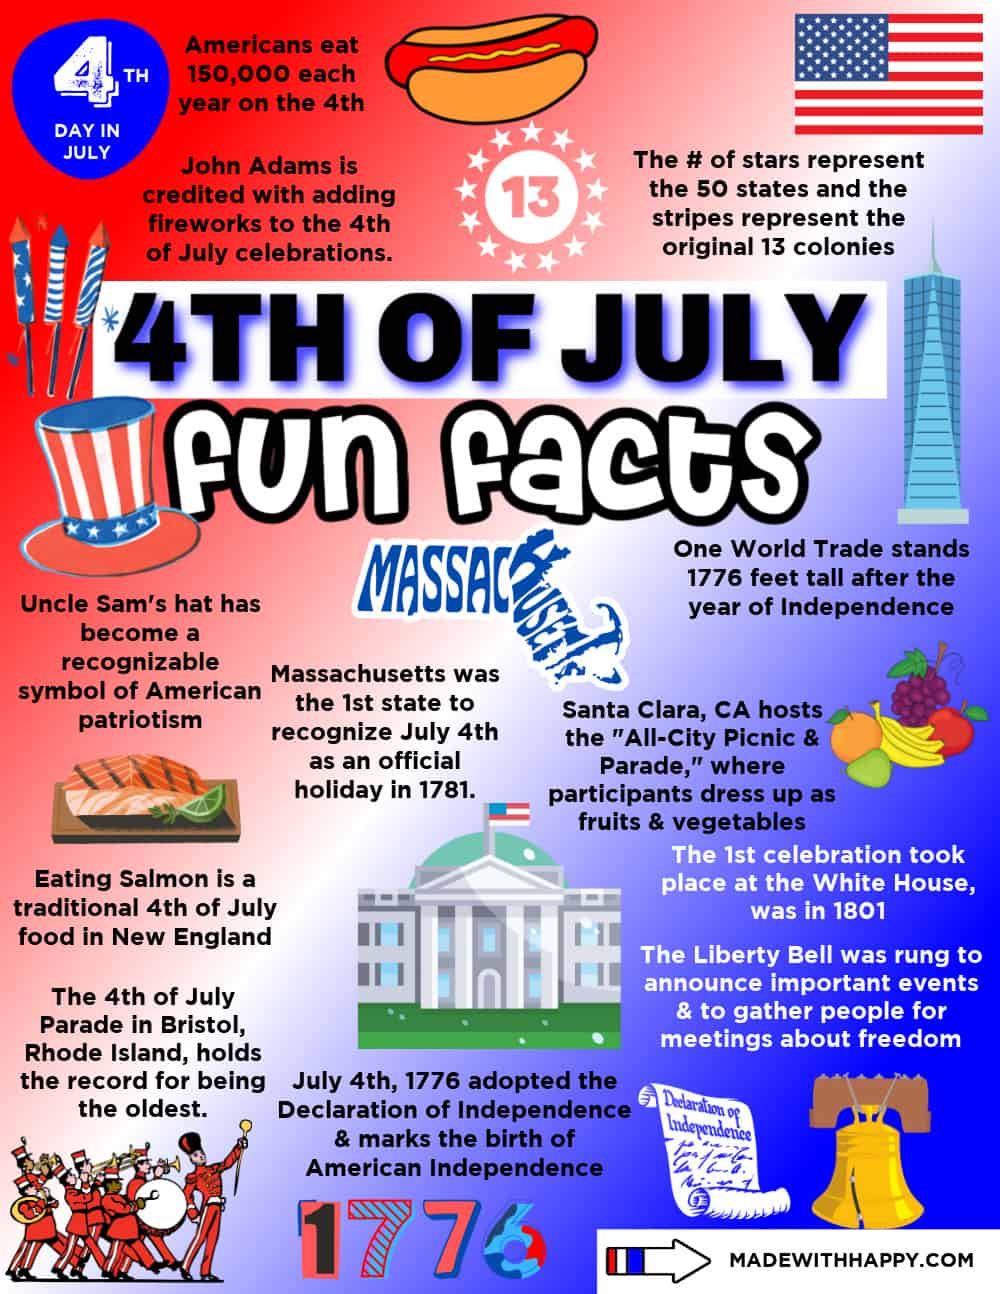 Fun Facts About the 4th of July